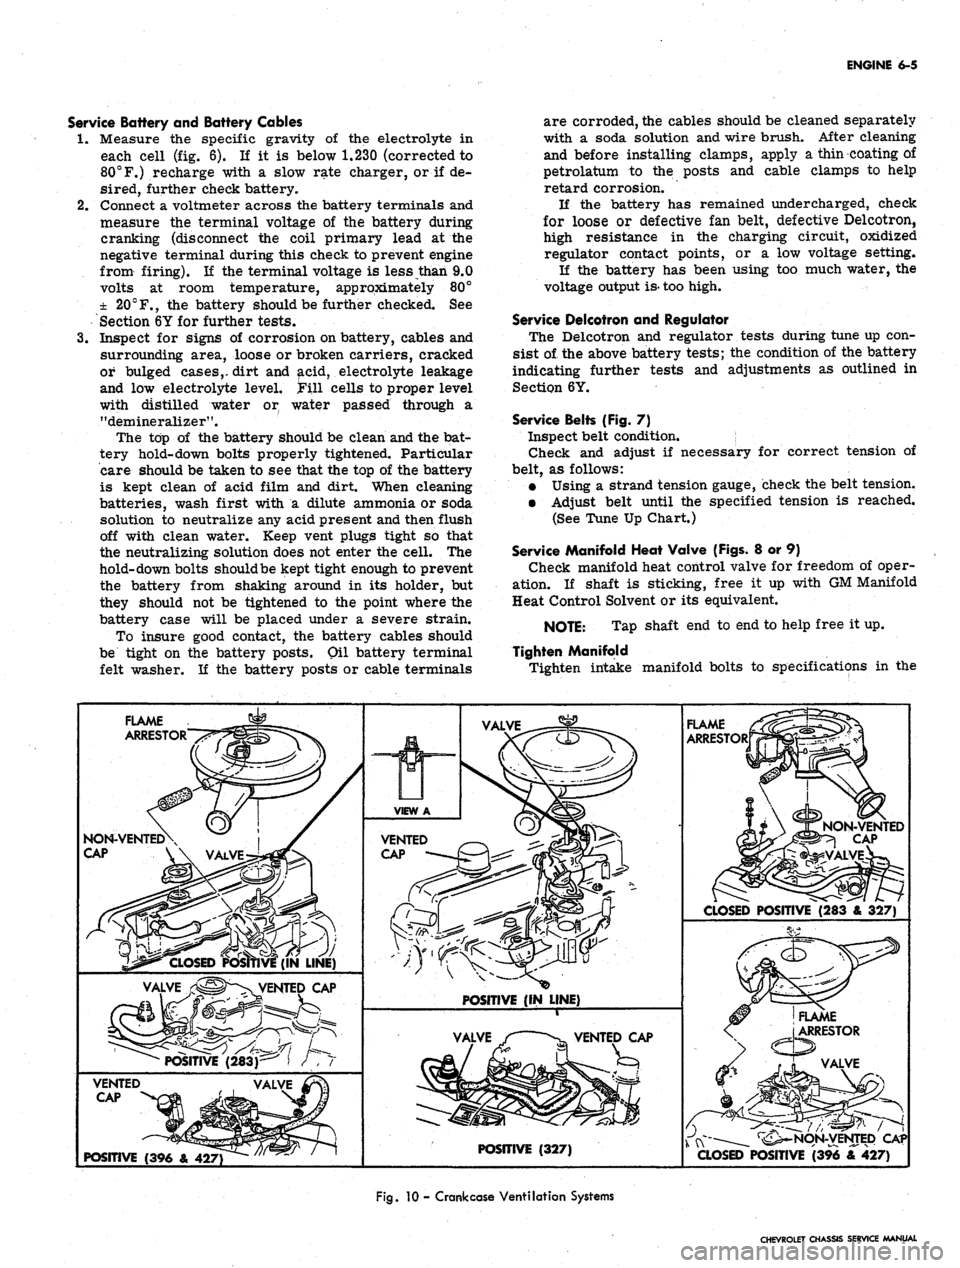 CHEVROLET CAMARO 1967 1.G Chassis Repair Manual 
ENGINE
 6-5

Service Battery and Battery Cables

1.
 Measure the specific gravity of the electrolyte in

each cell (fig. 6). If it is below 1.230 (corrected to

80°F.) recharge with a slow rate char